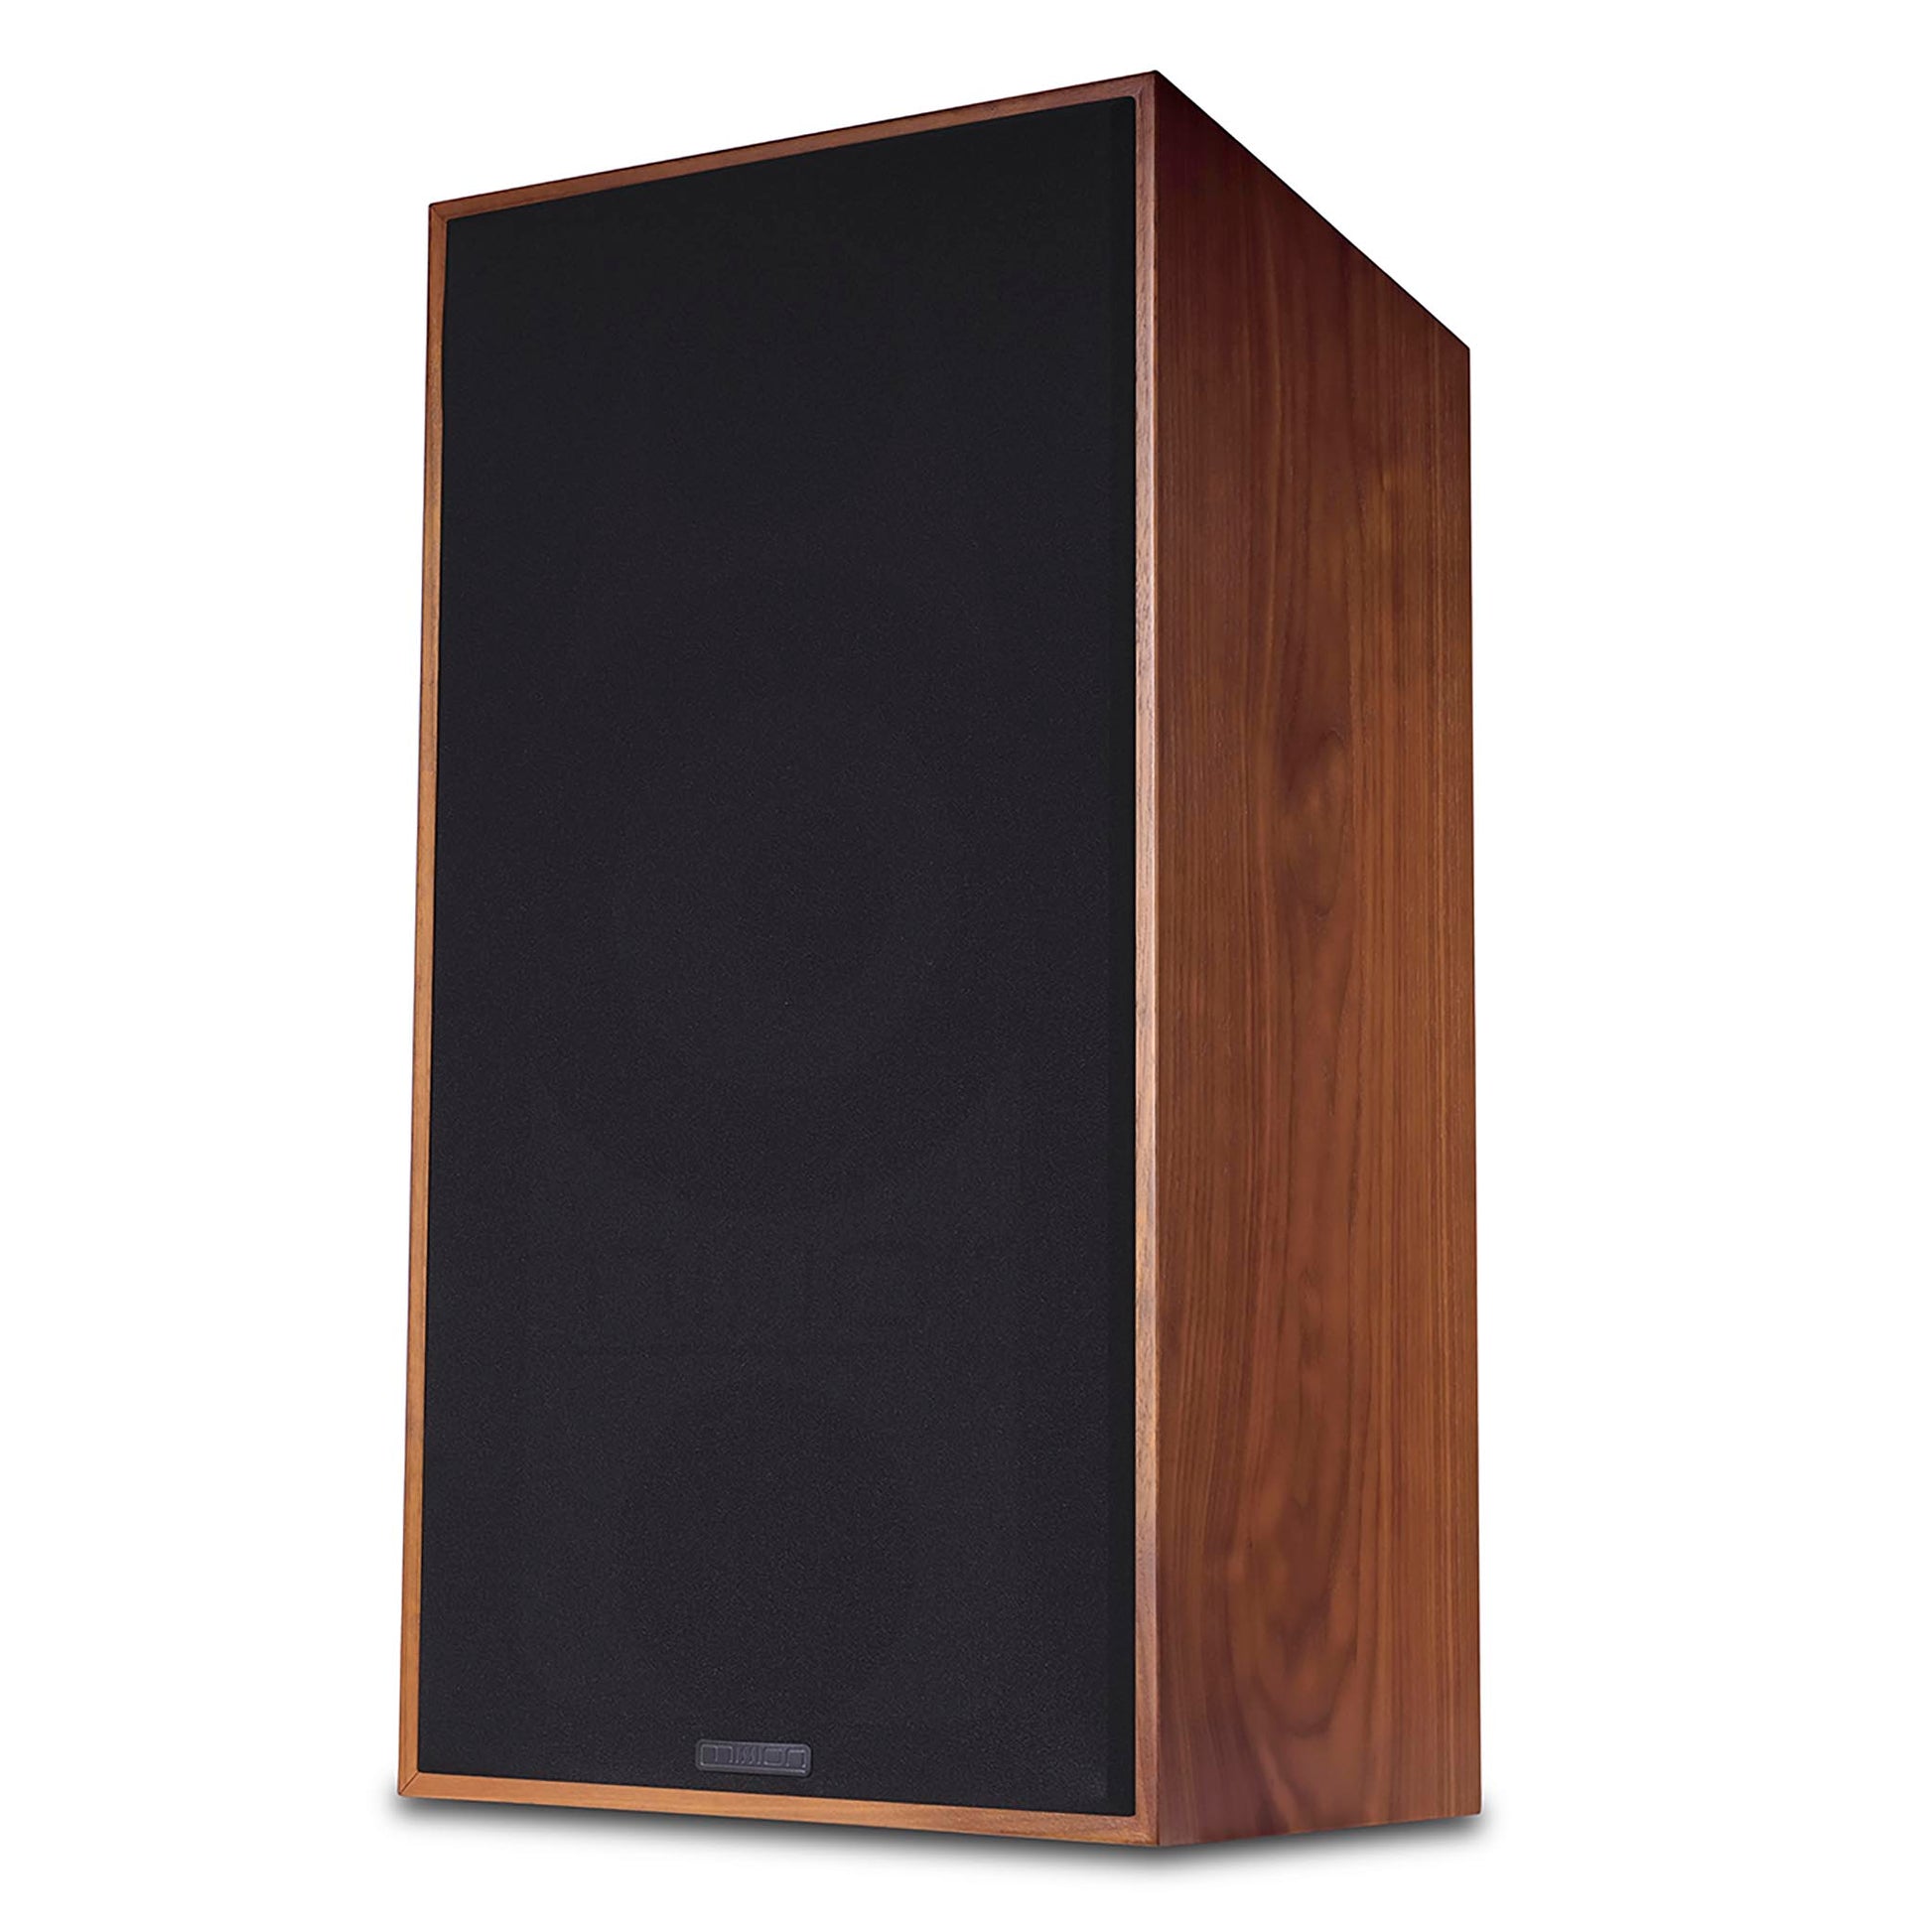 Mission 770 Bookshelf Loudspeakers with Stands (pair) - Walnut, side